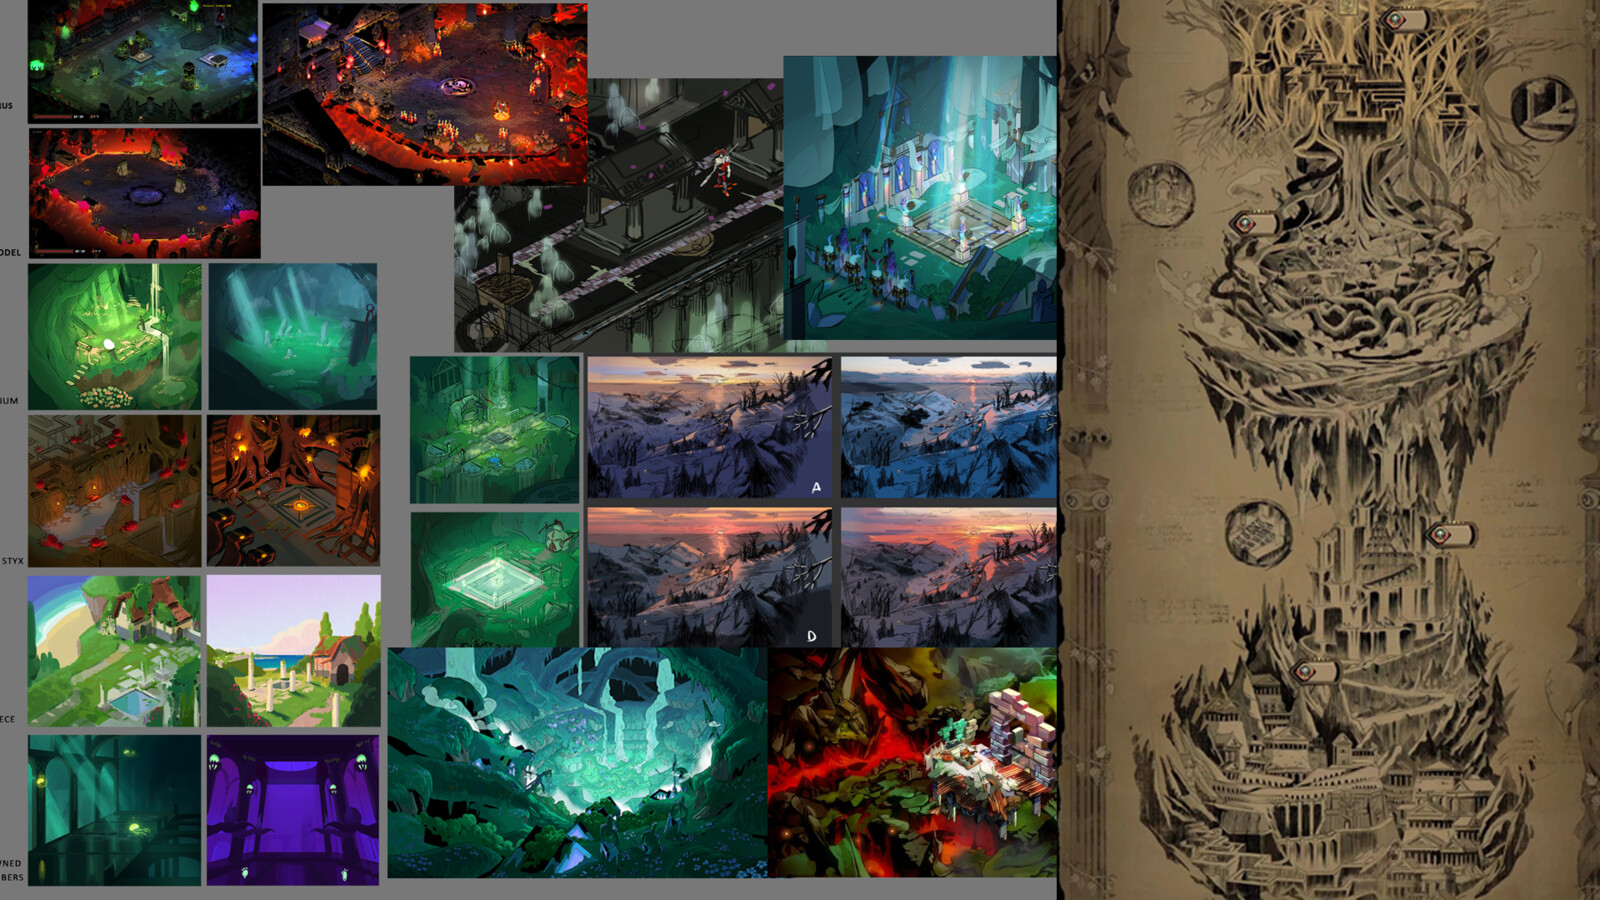 References/inspirations from Supergiant titles